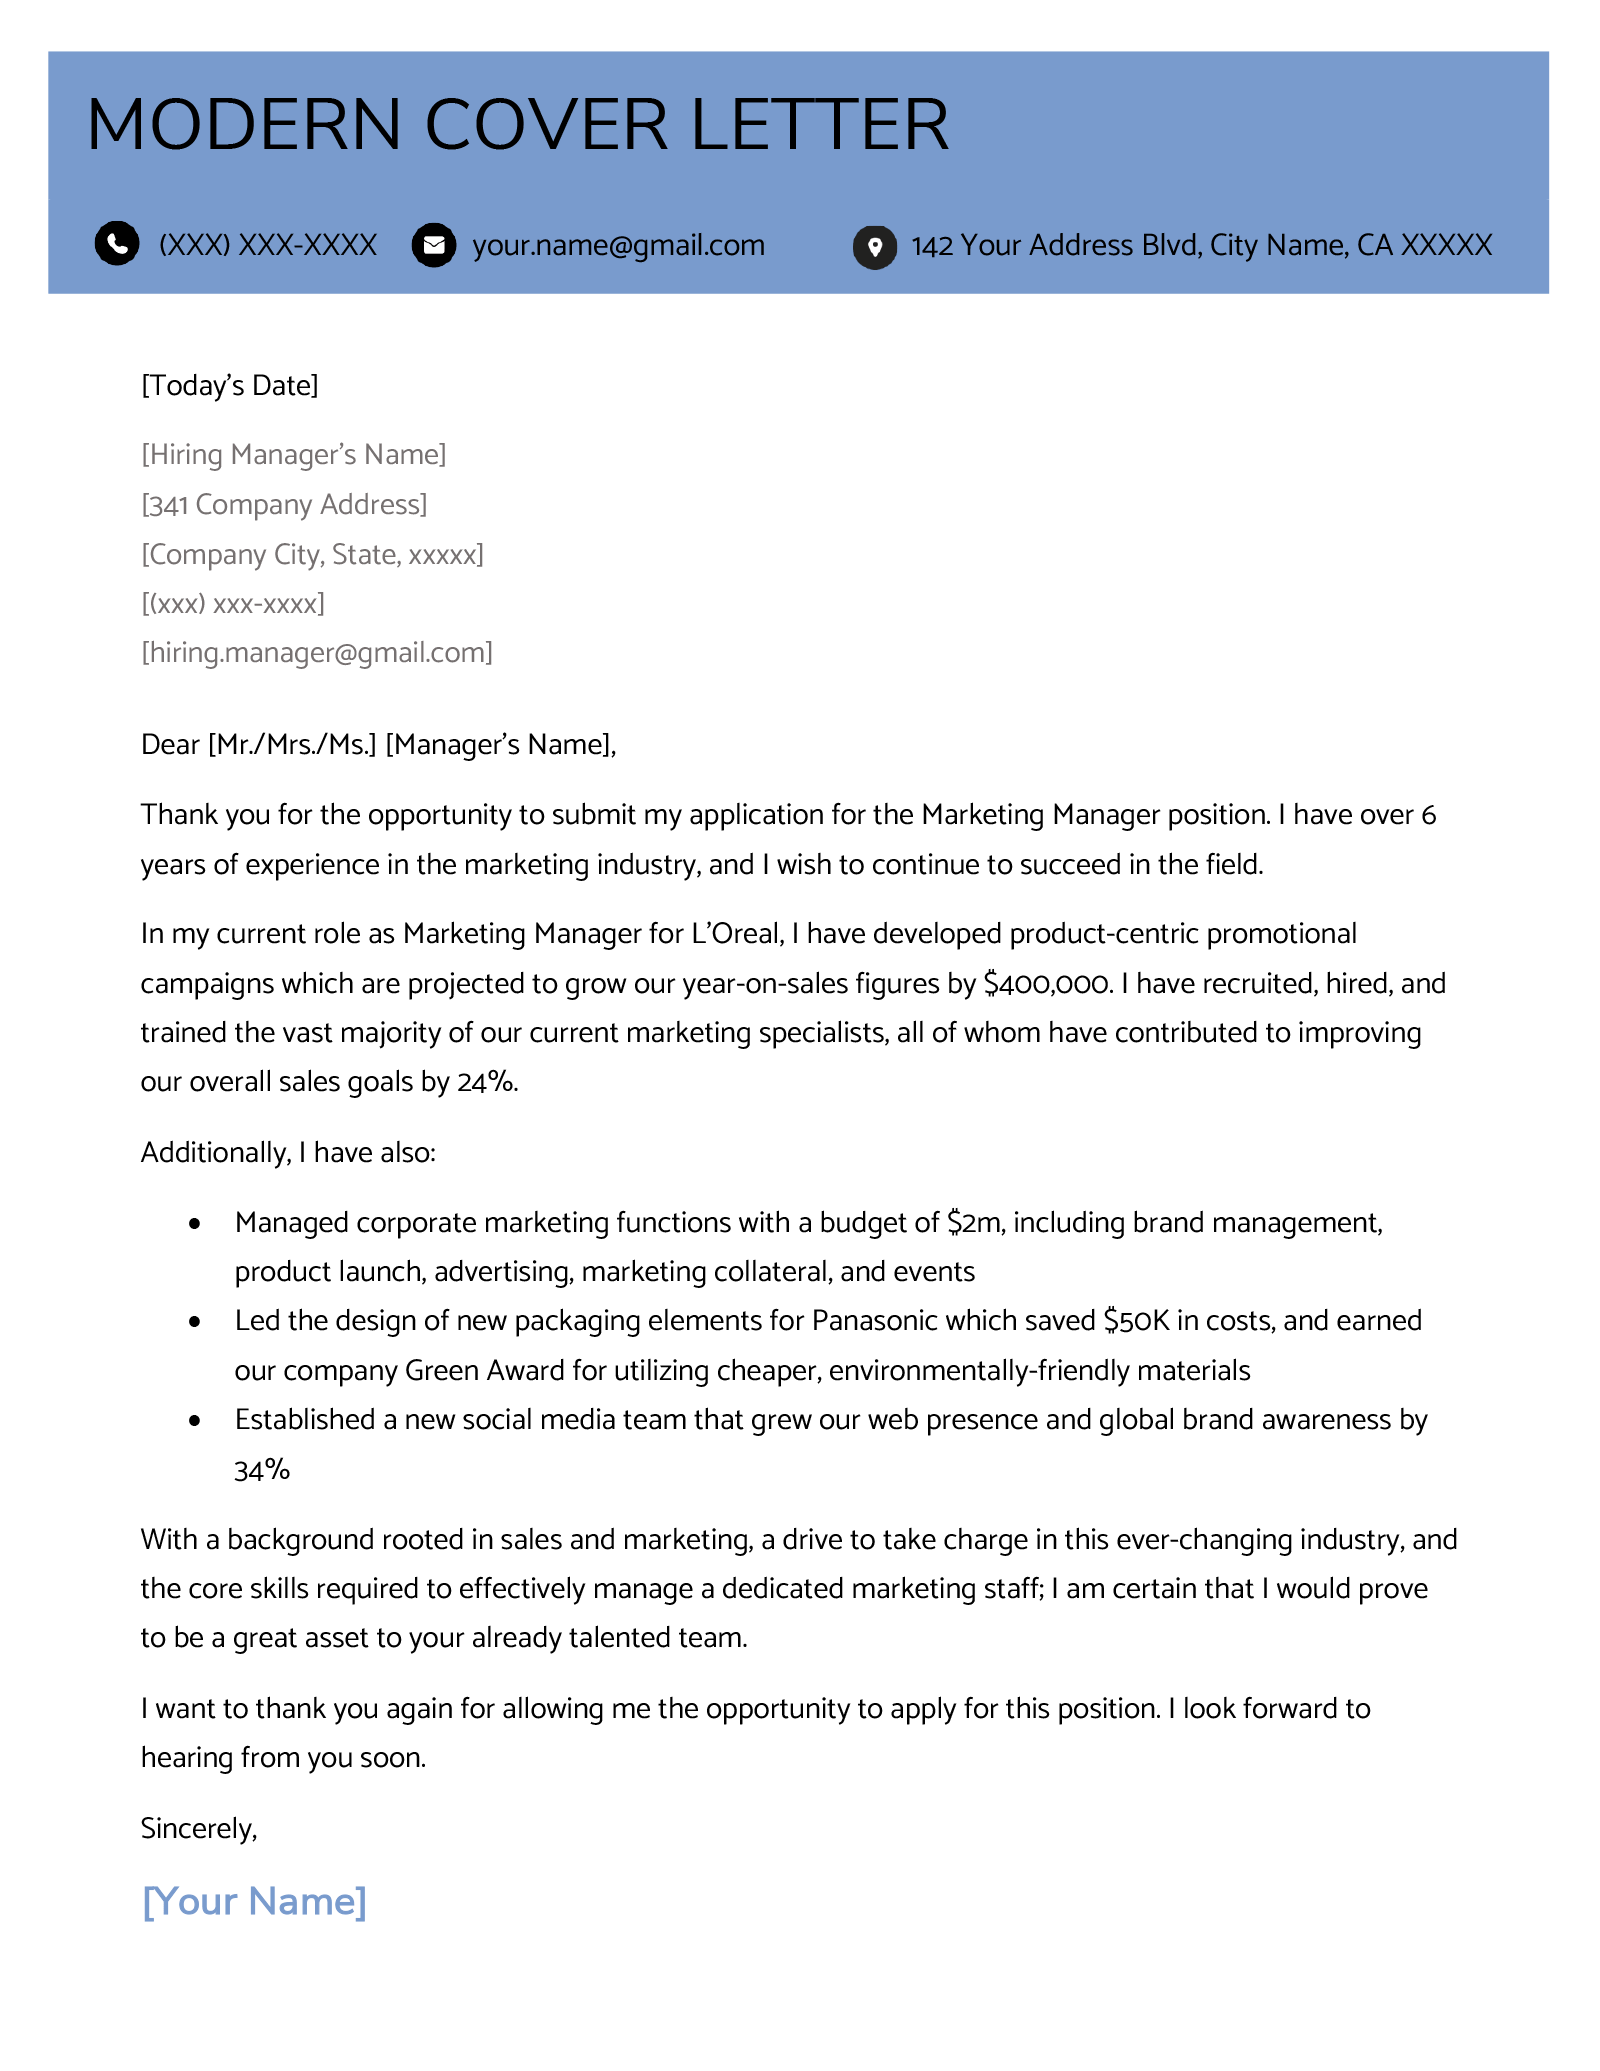 An example of a cover letter using a modern template with a blue header